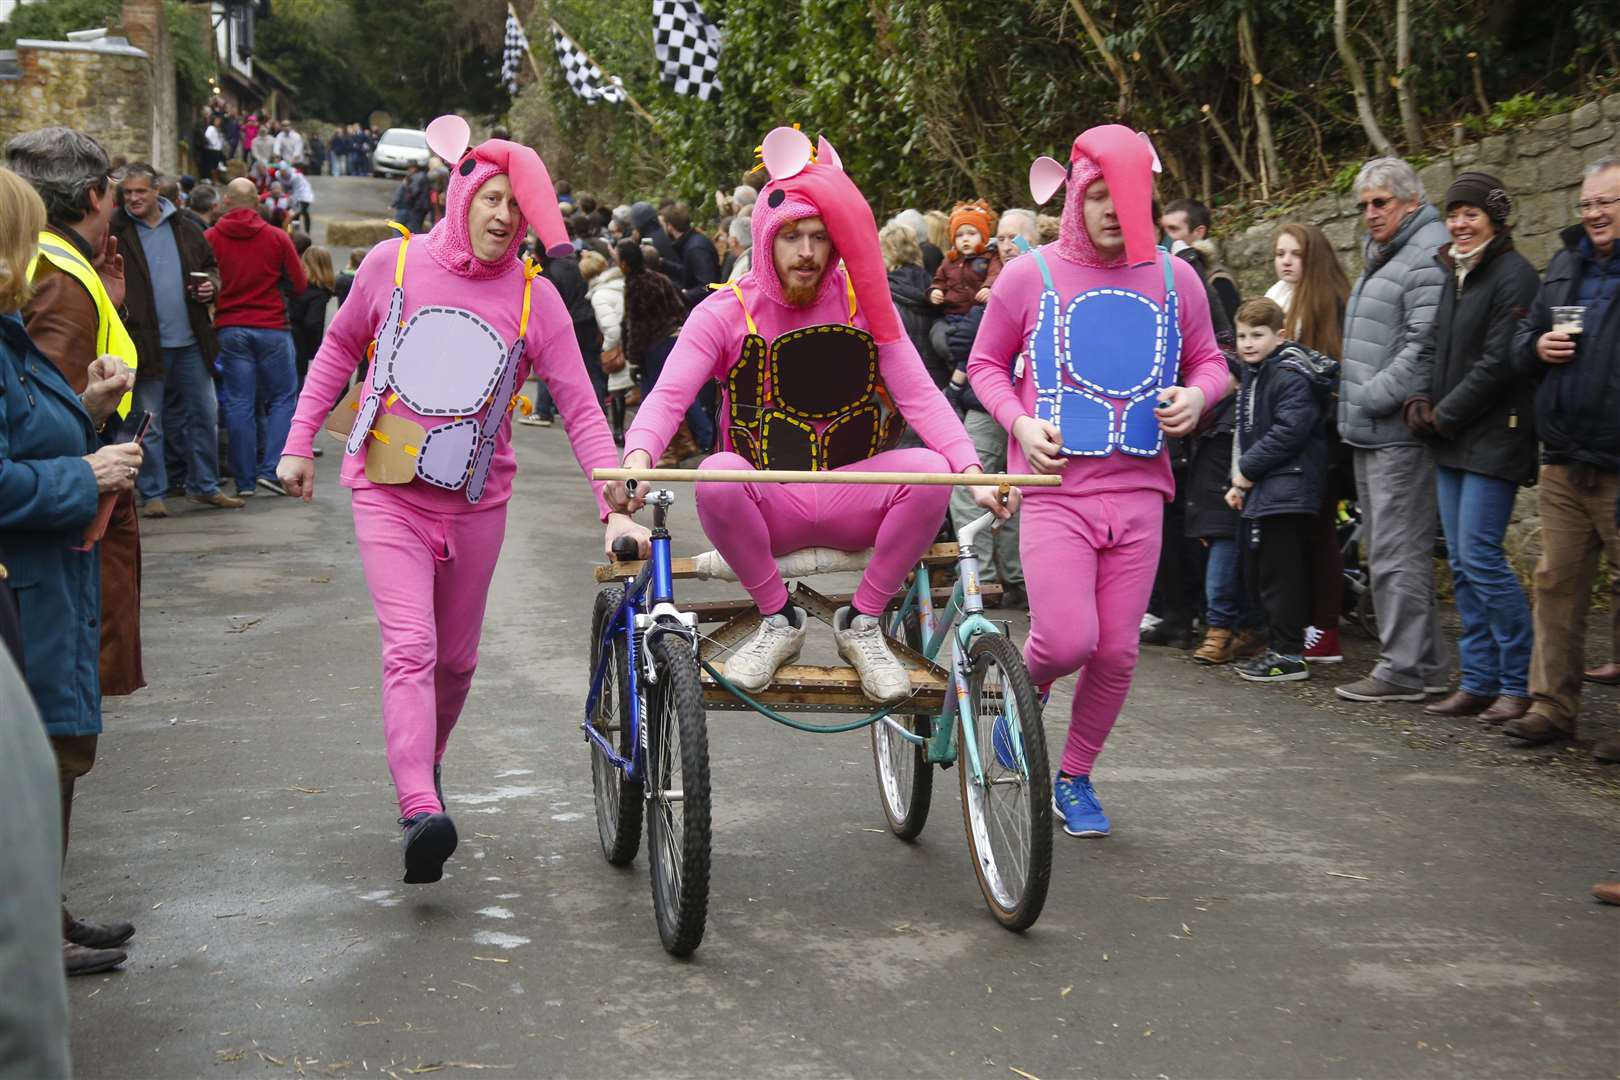 The Clangers compete in the New Year's Day Pram Race